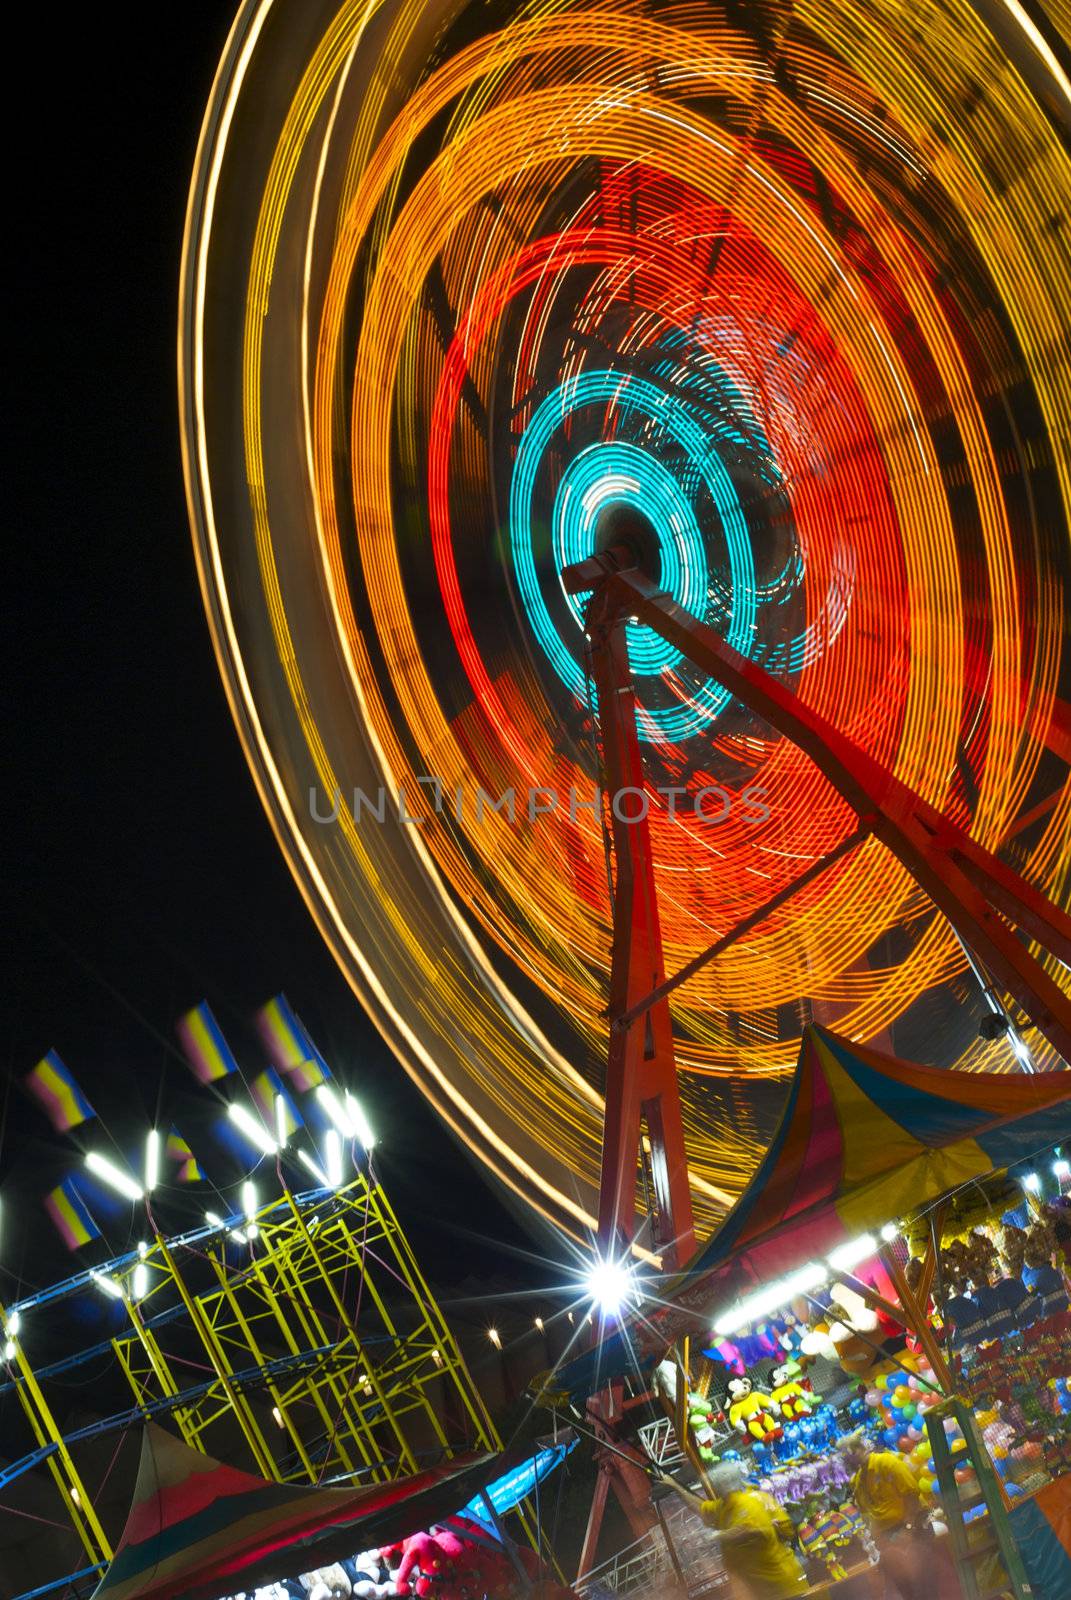 A spinning ferris wheel, colorful flags and carnival games at night